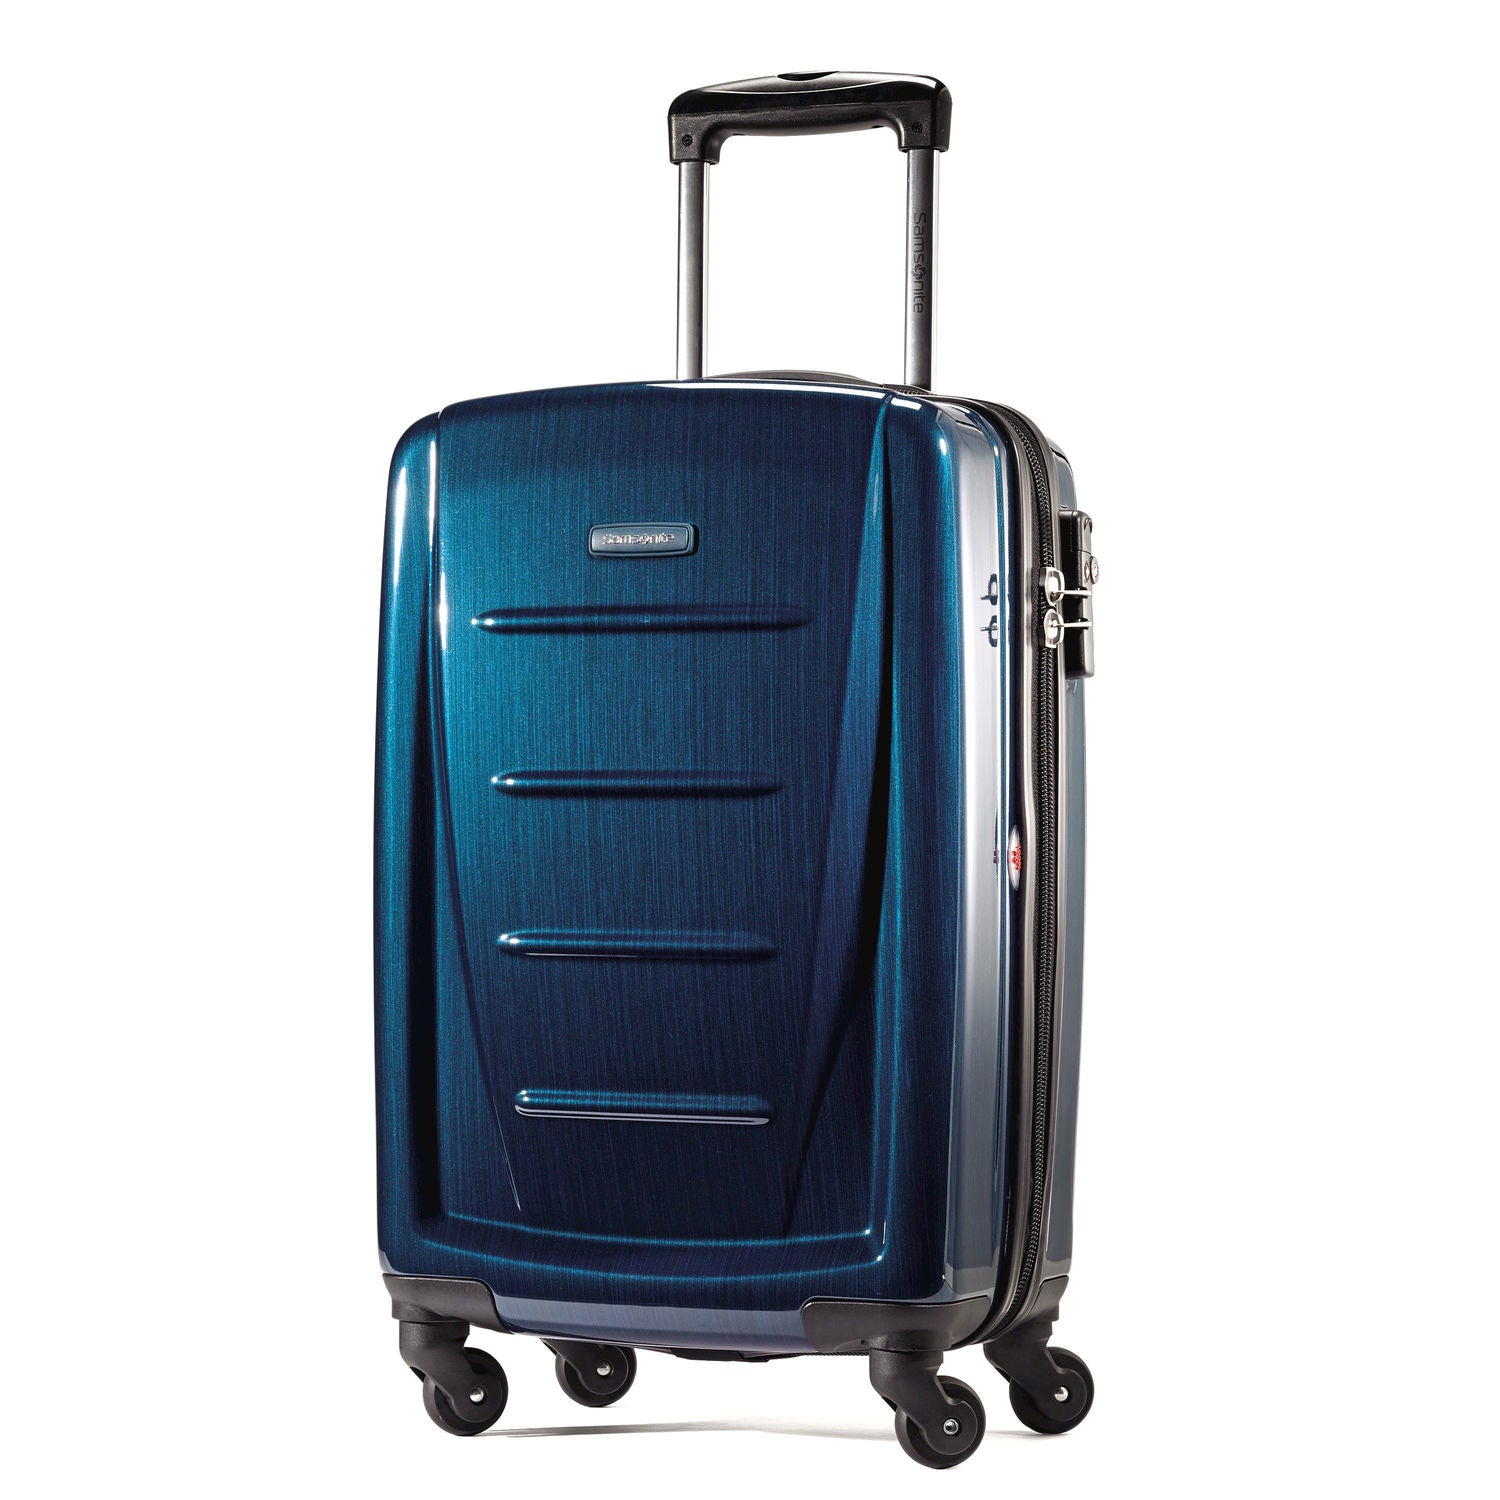 Samsonite Winfield 2 Fashion Spinner 20 Carry On